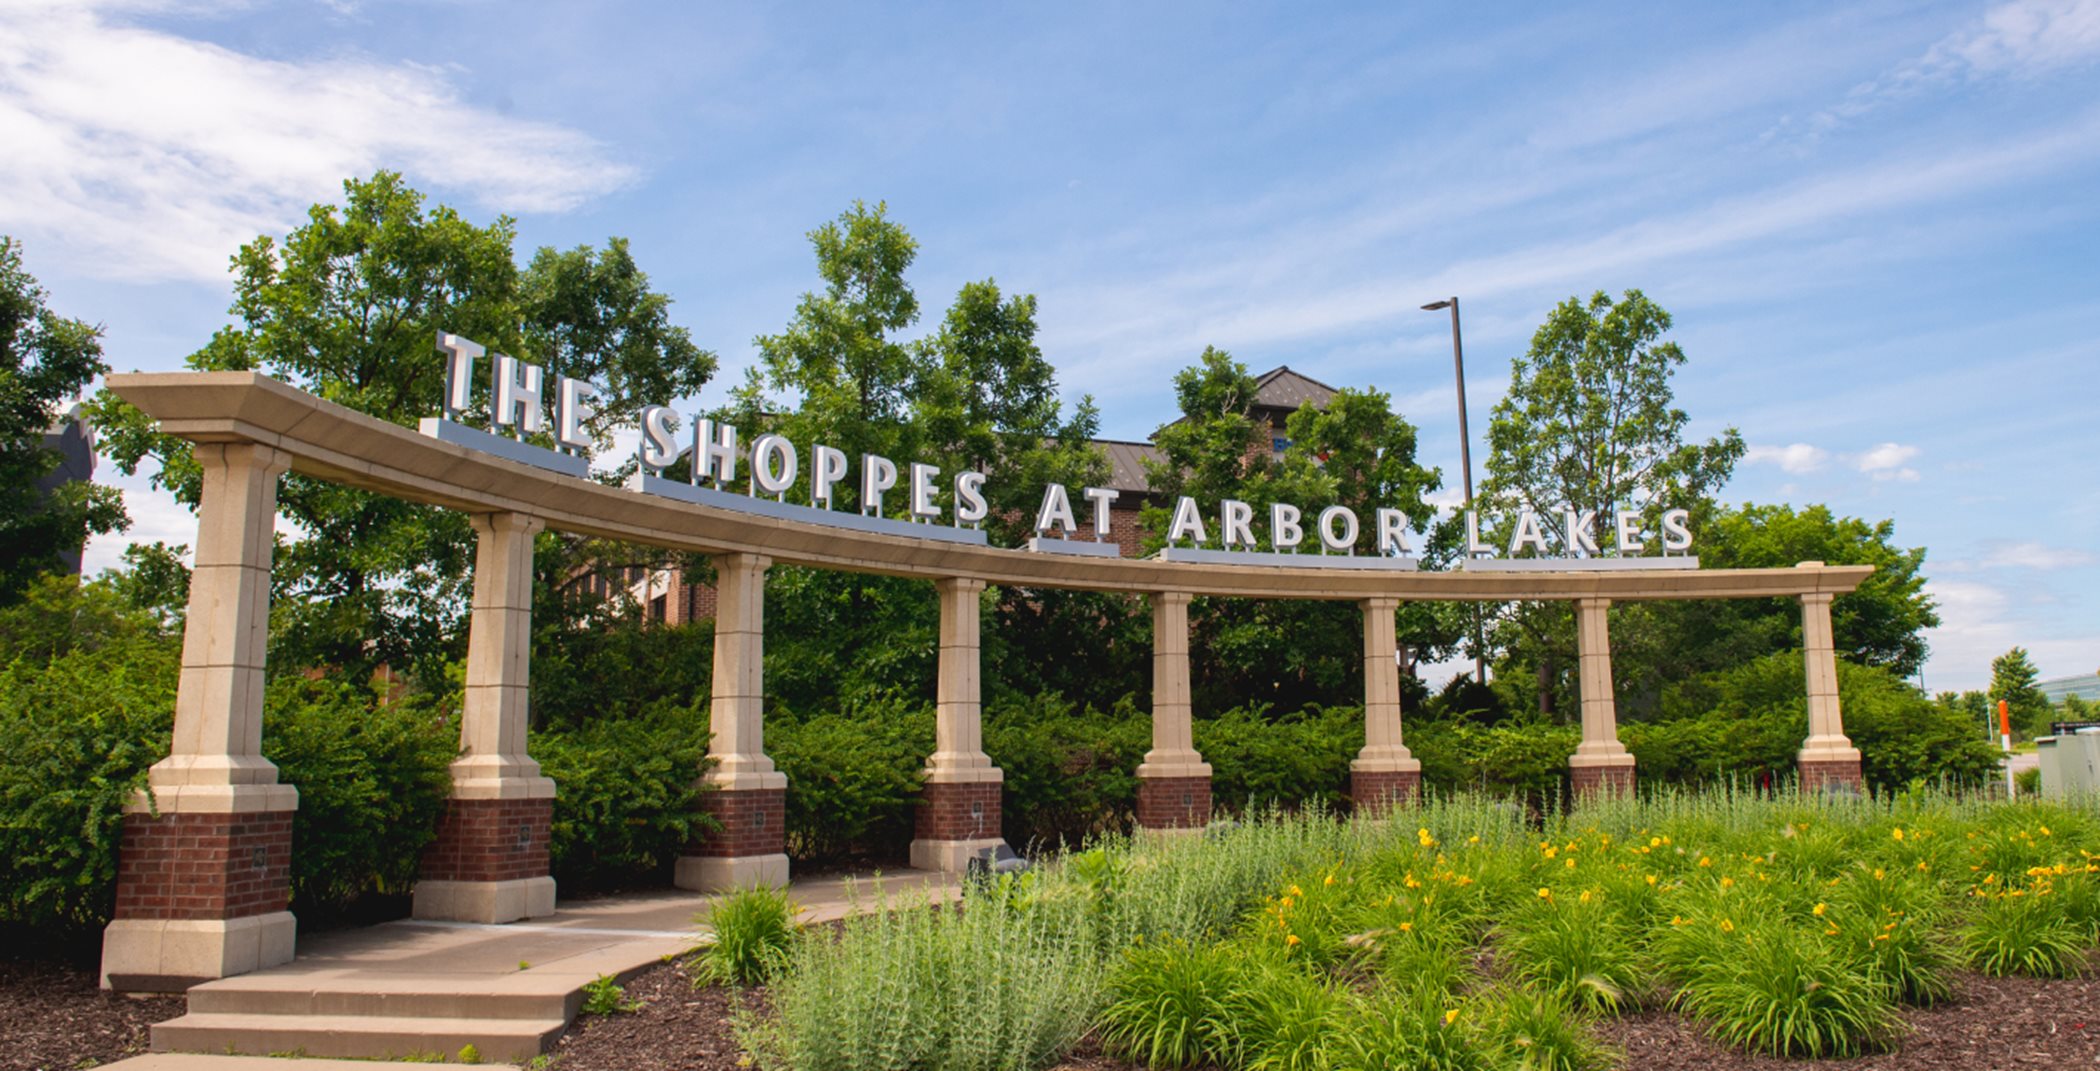 The Shoppes at Arbor Lakes